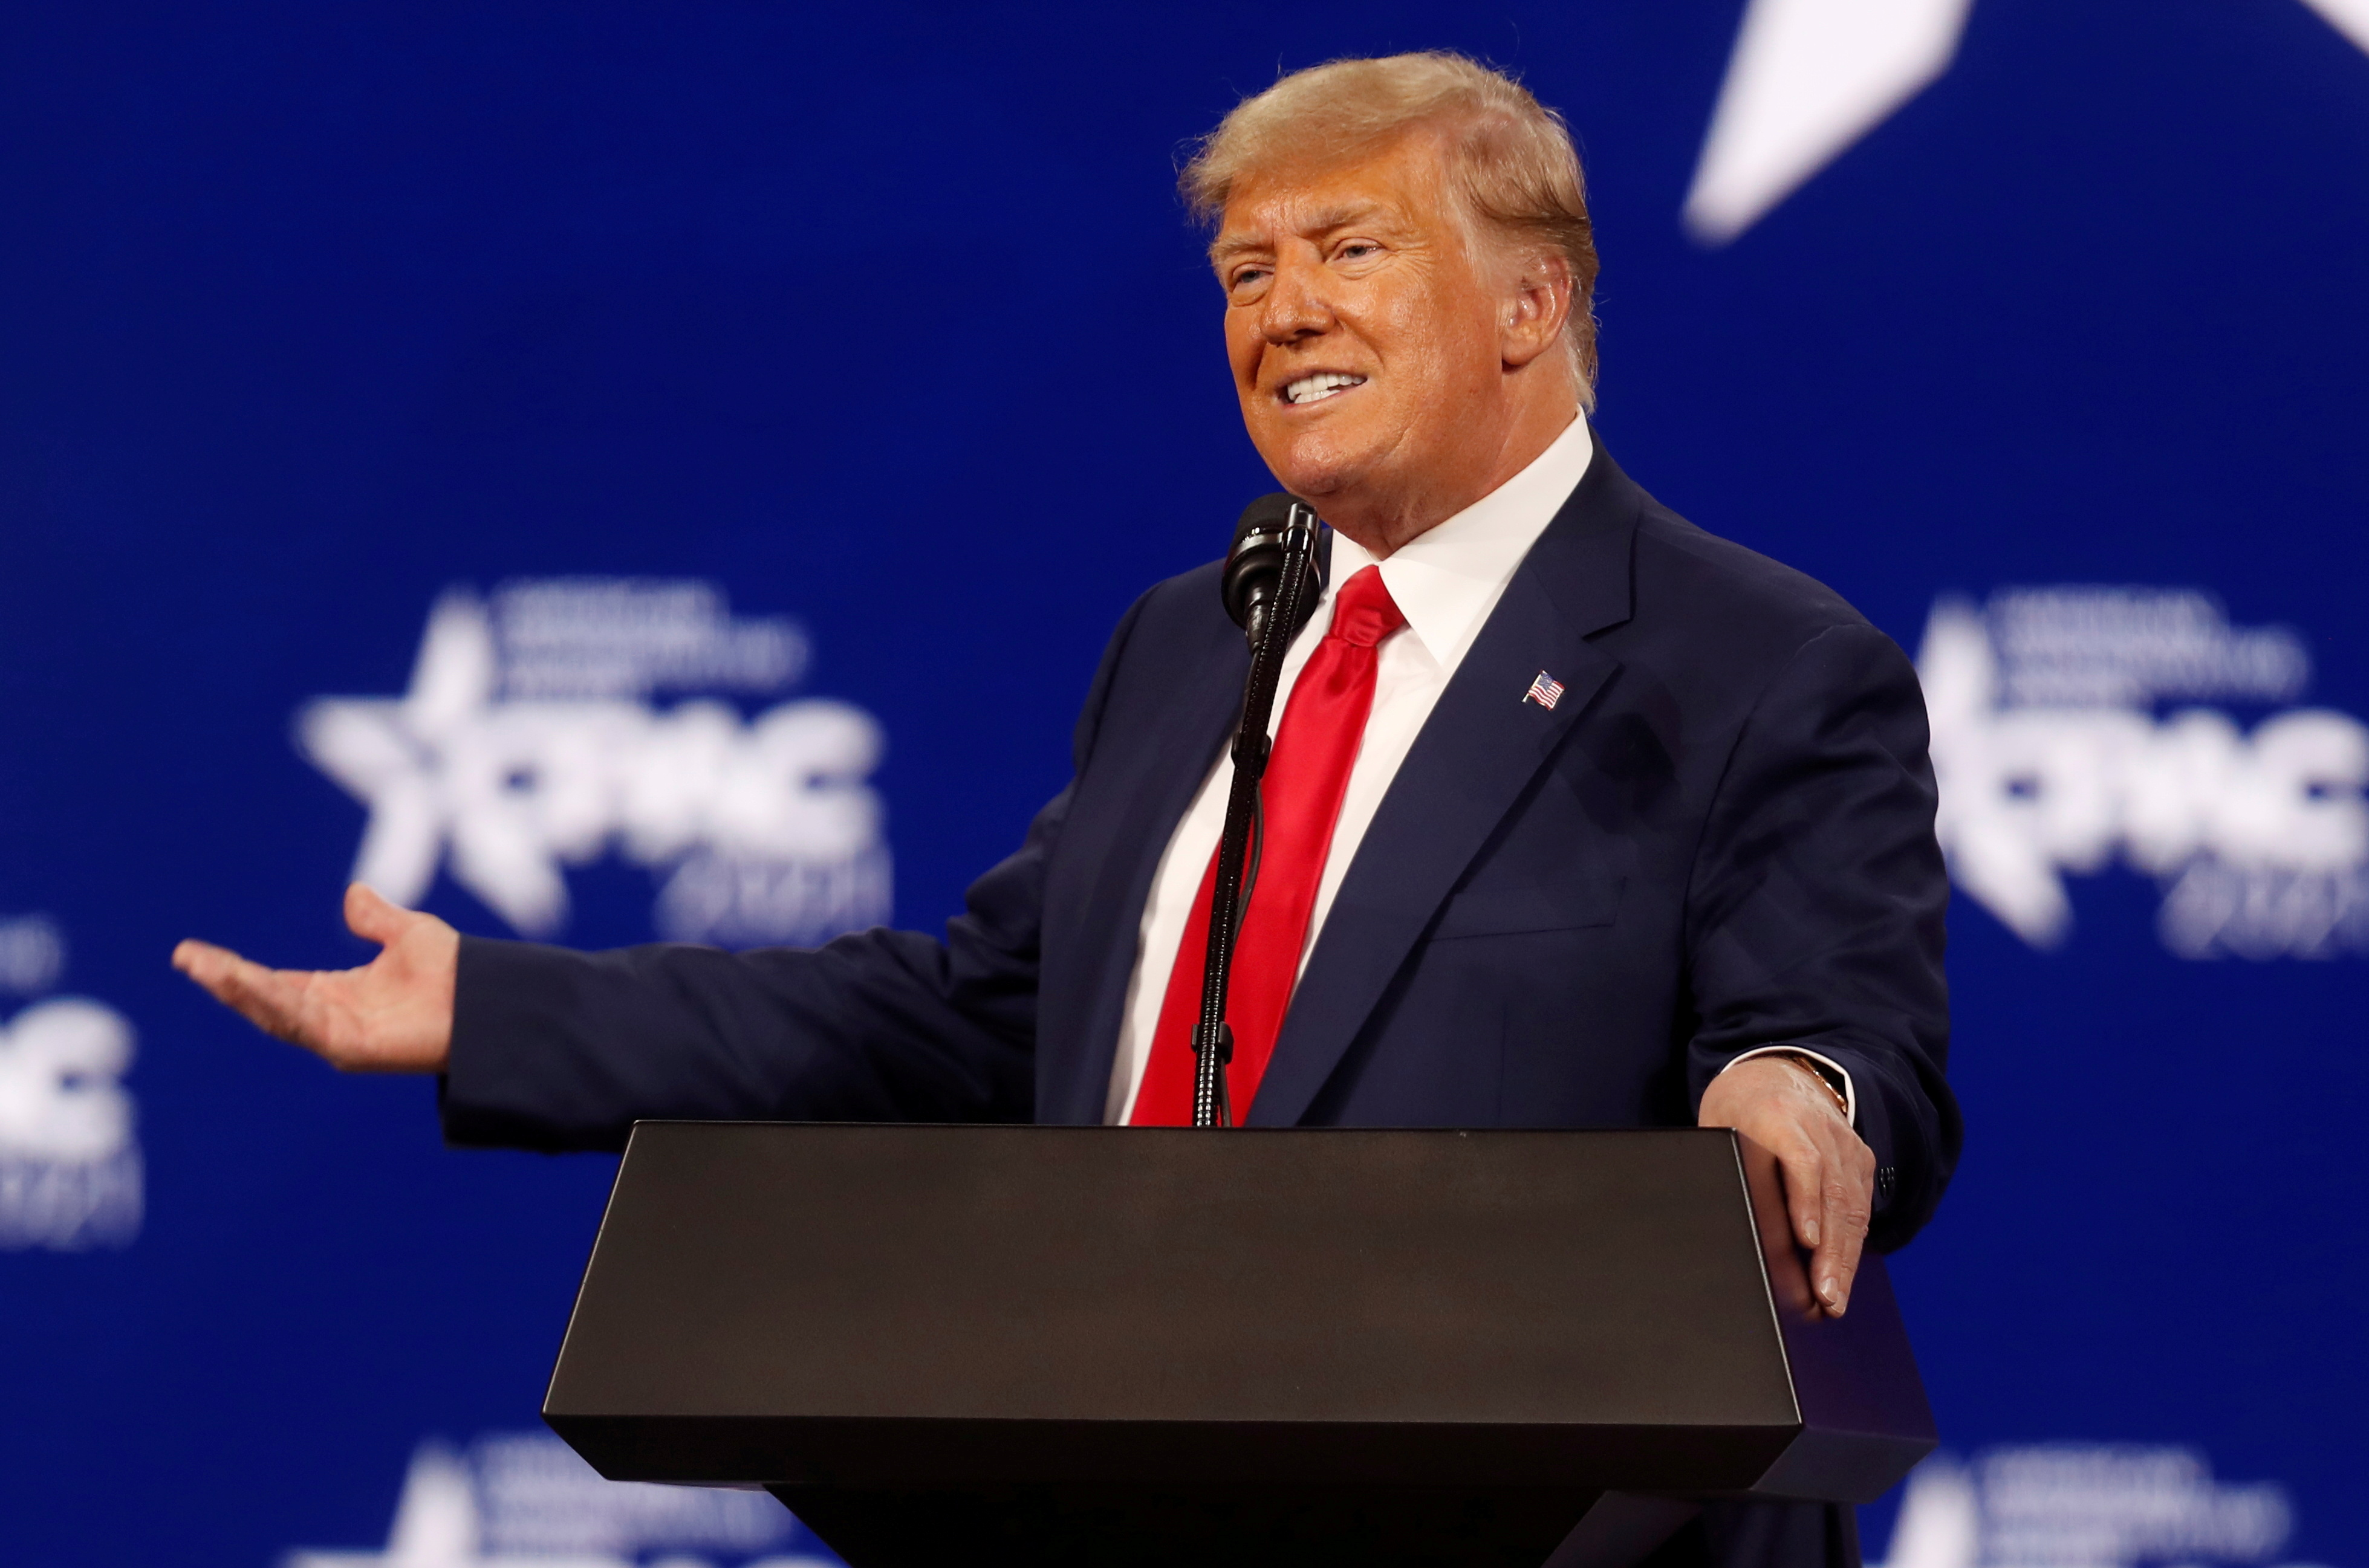 Former U.S. President Donald Trump speaks at the Conservative Political Action Conference in Orlando